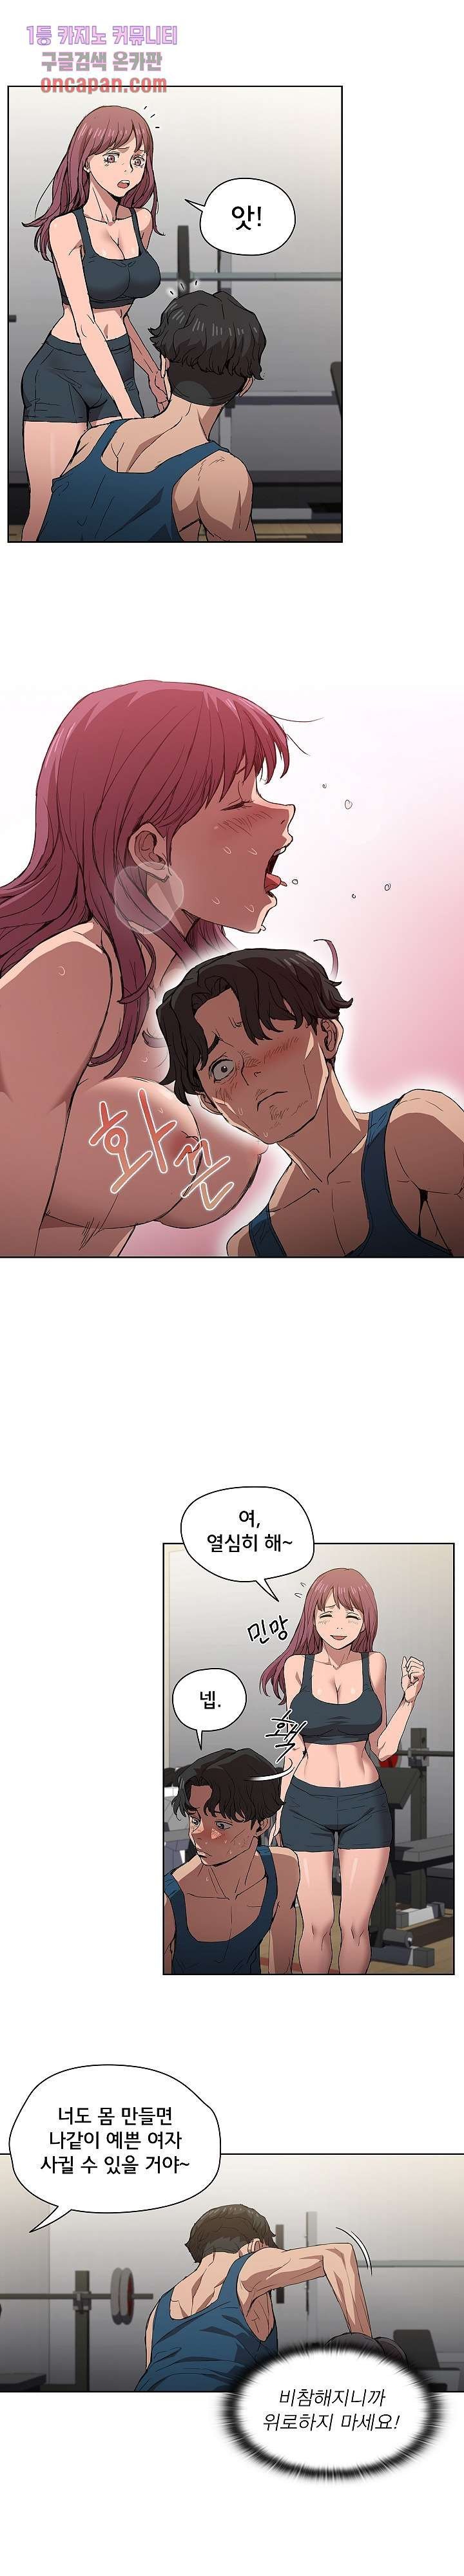 how-about-getting-lost-raw-chap-27-18